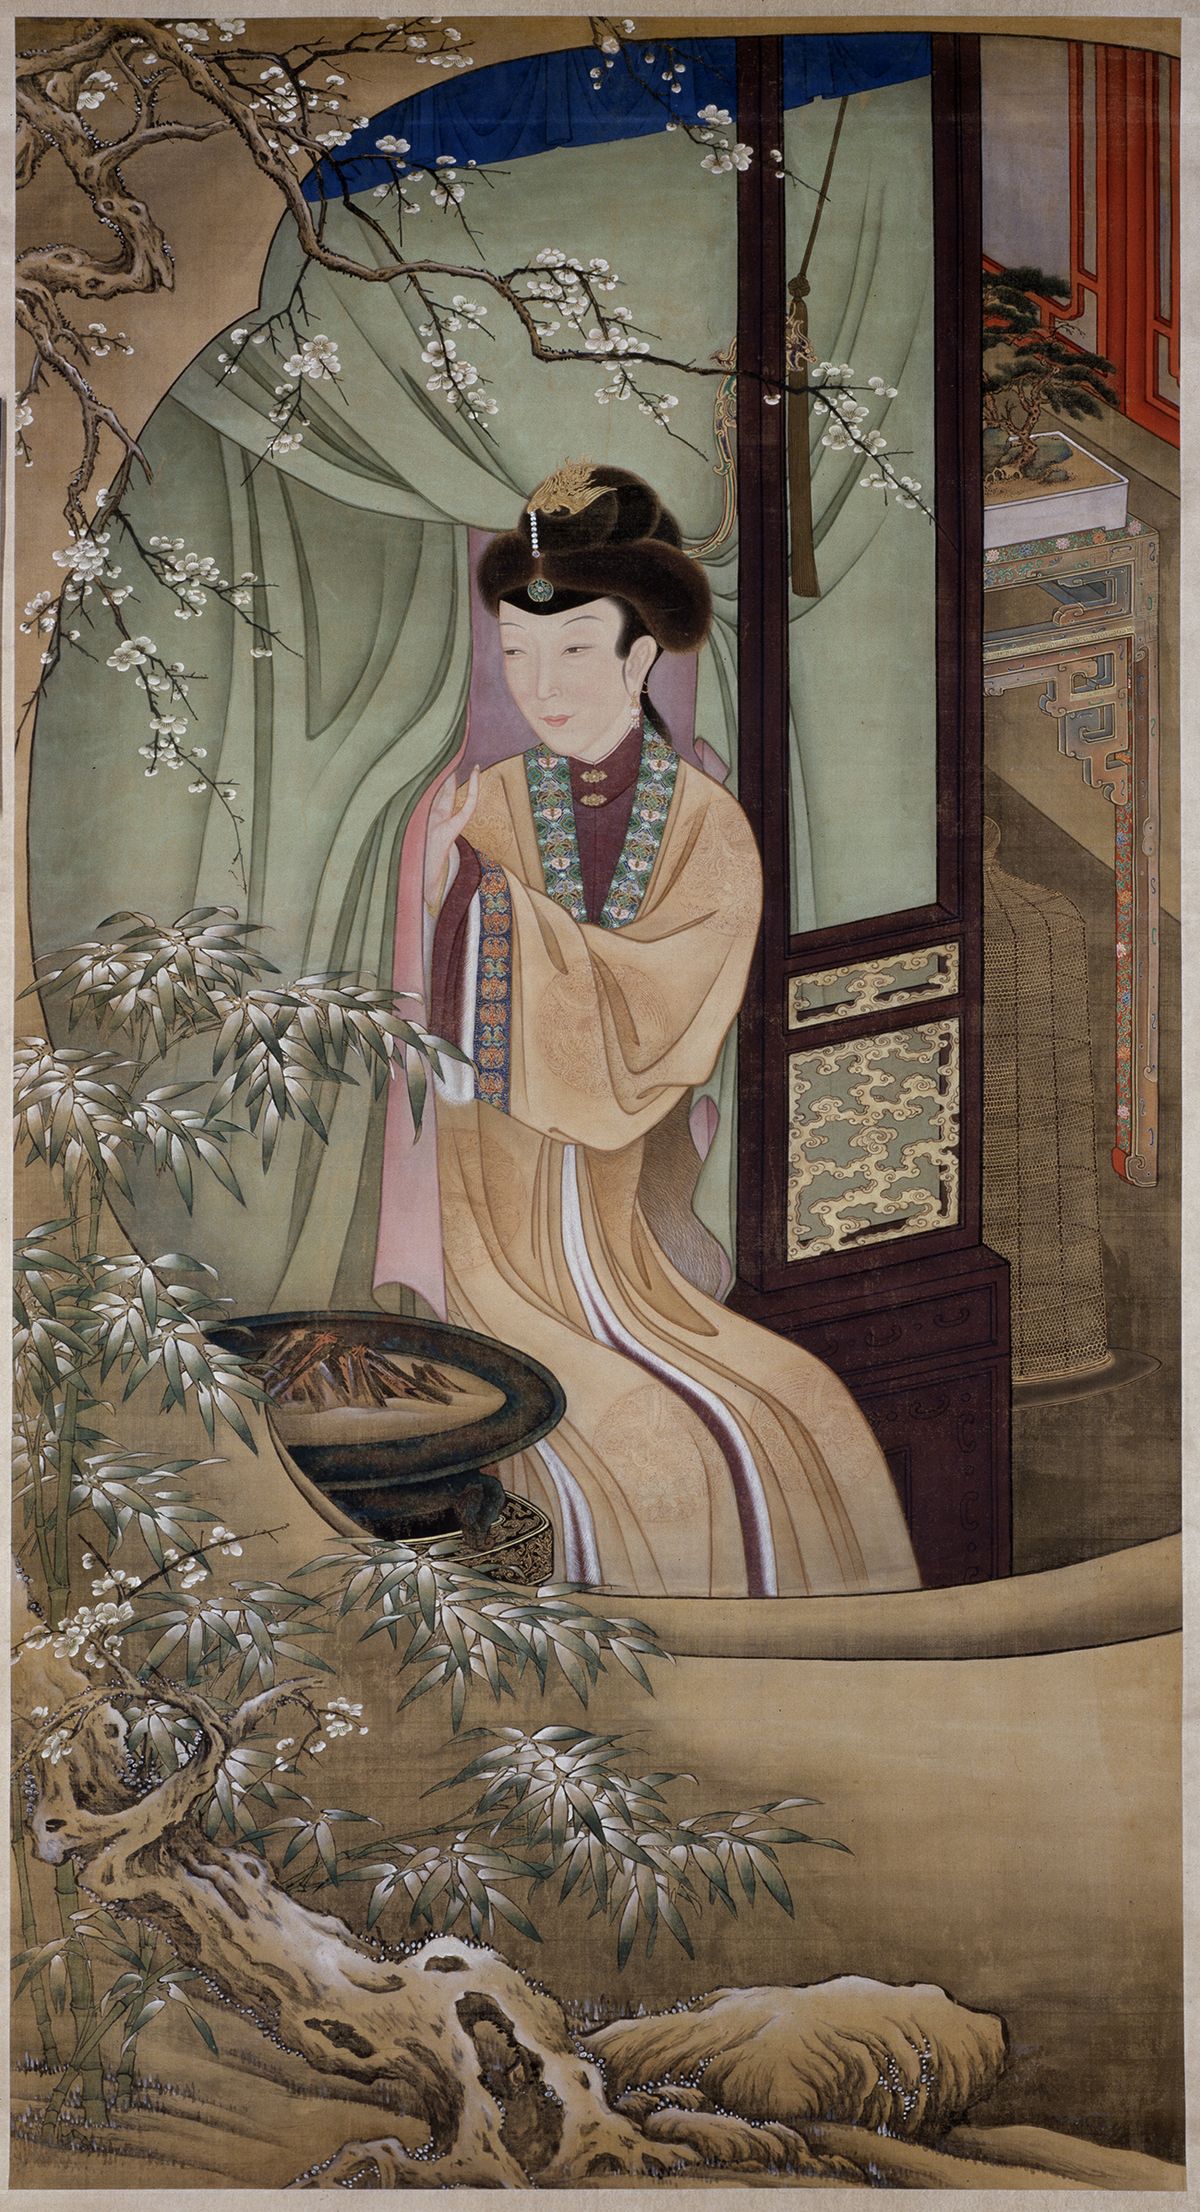 A hanging scroll by 17th- or 18th-century court painters in Beijing © The Palace Museum